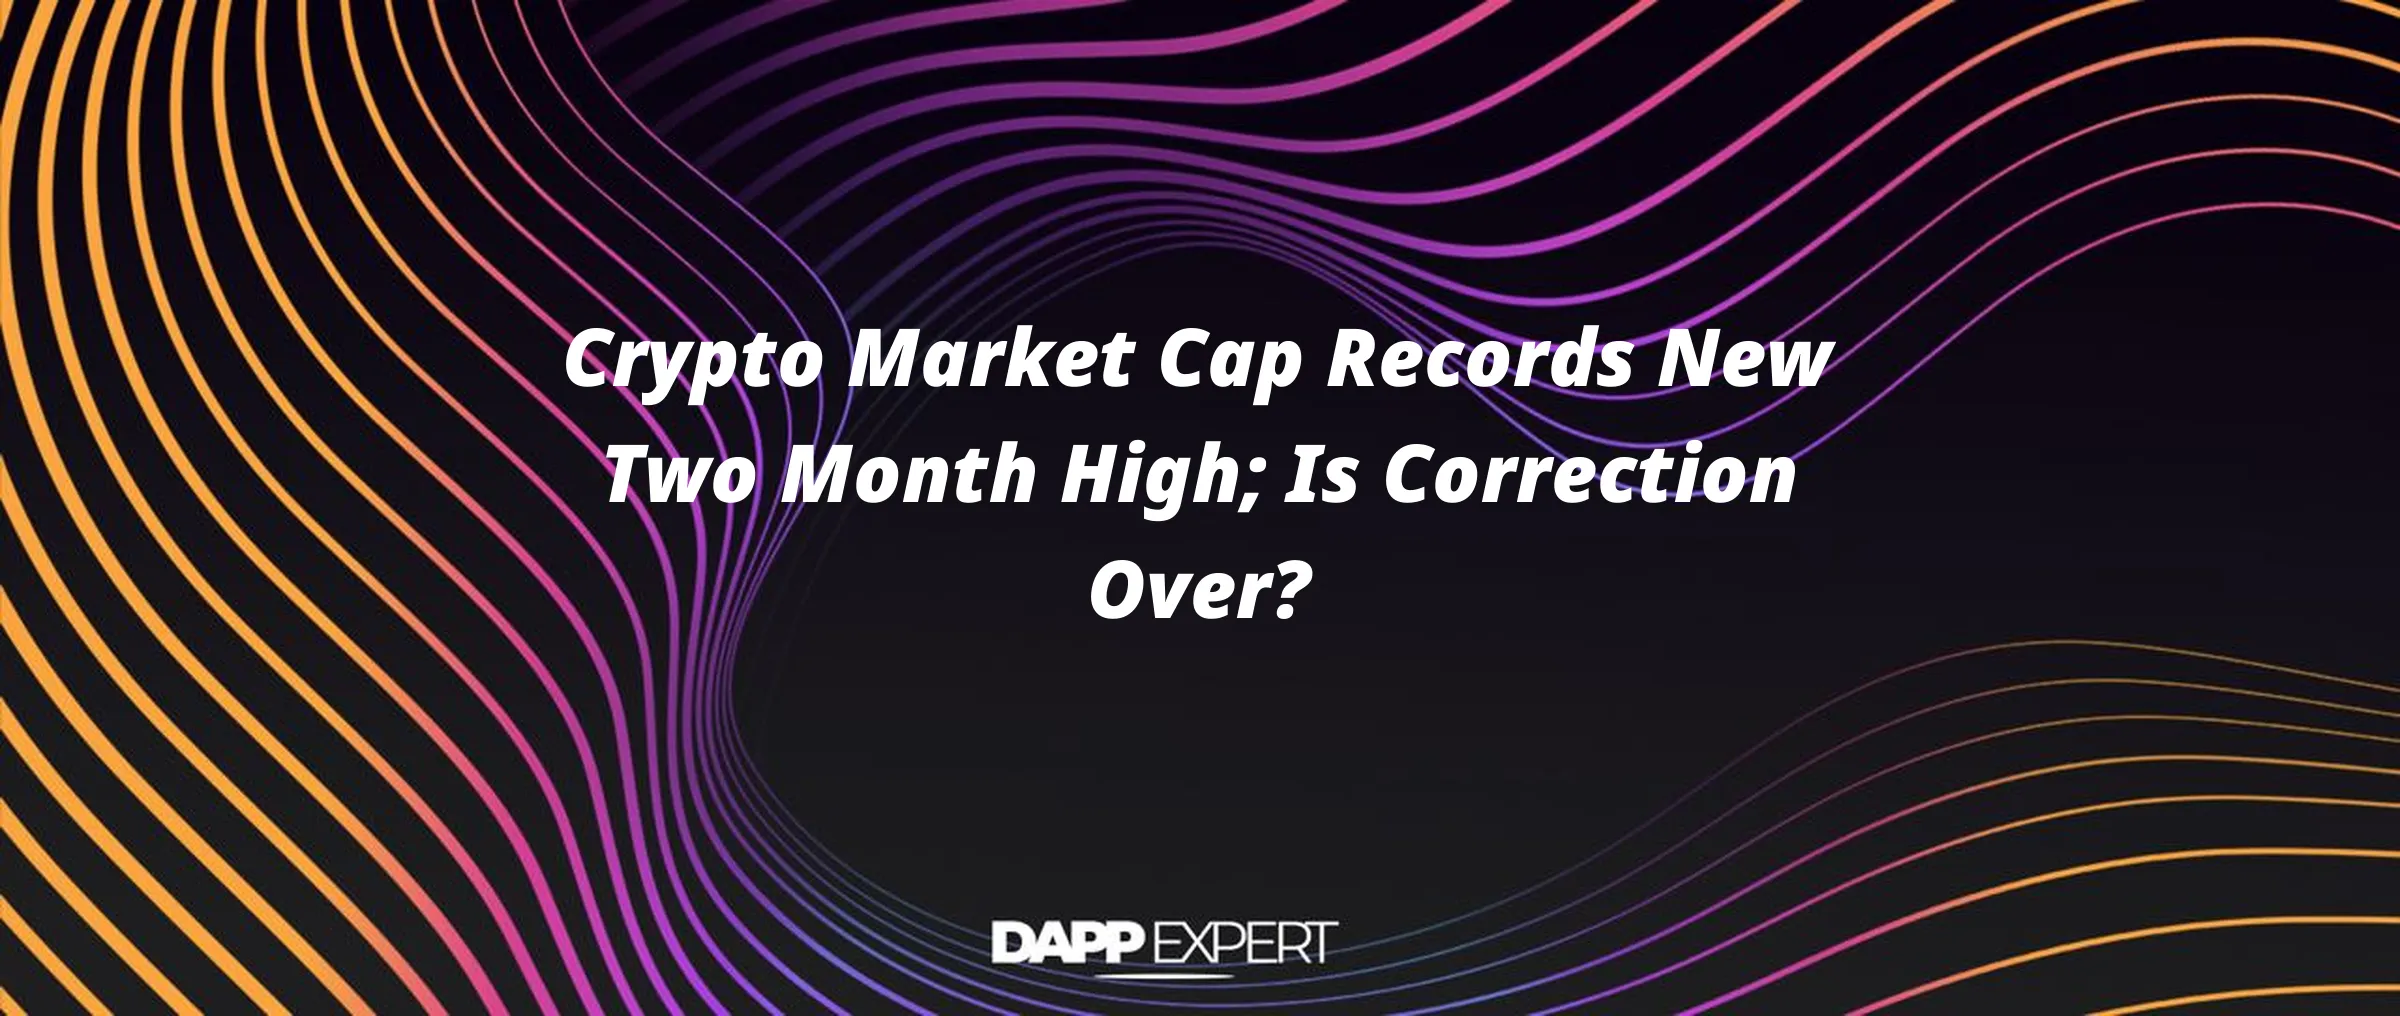 Crypto Market Cap Records New Two Month High; Is Correction Over?